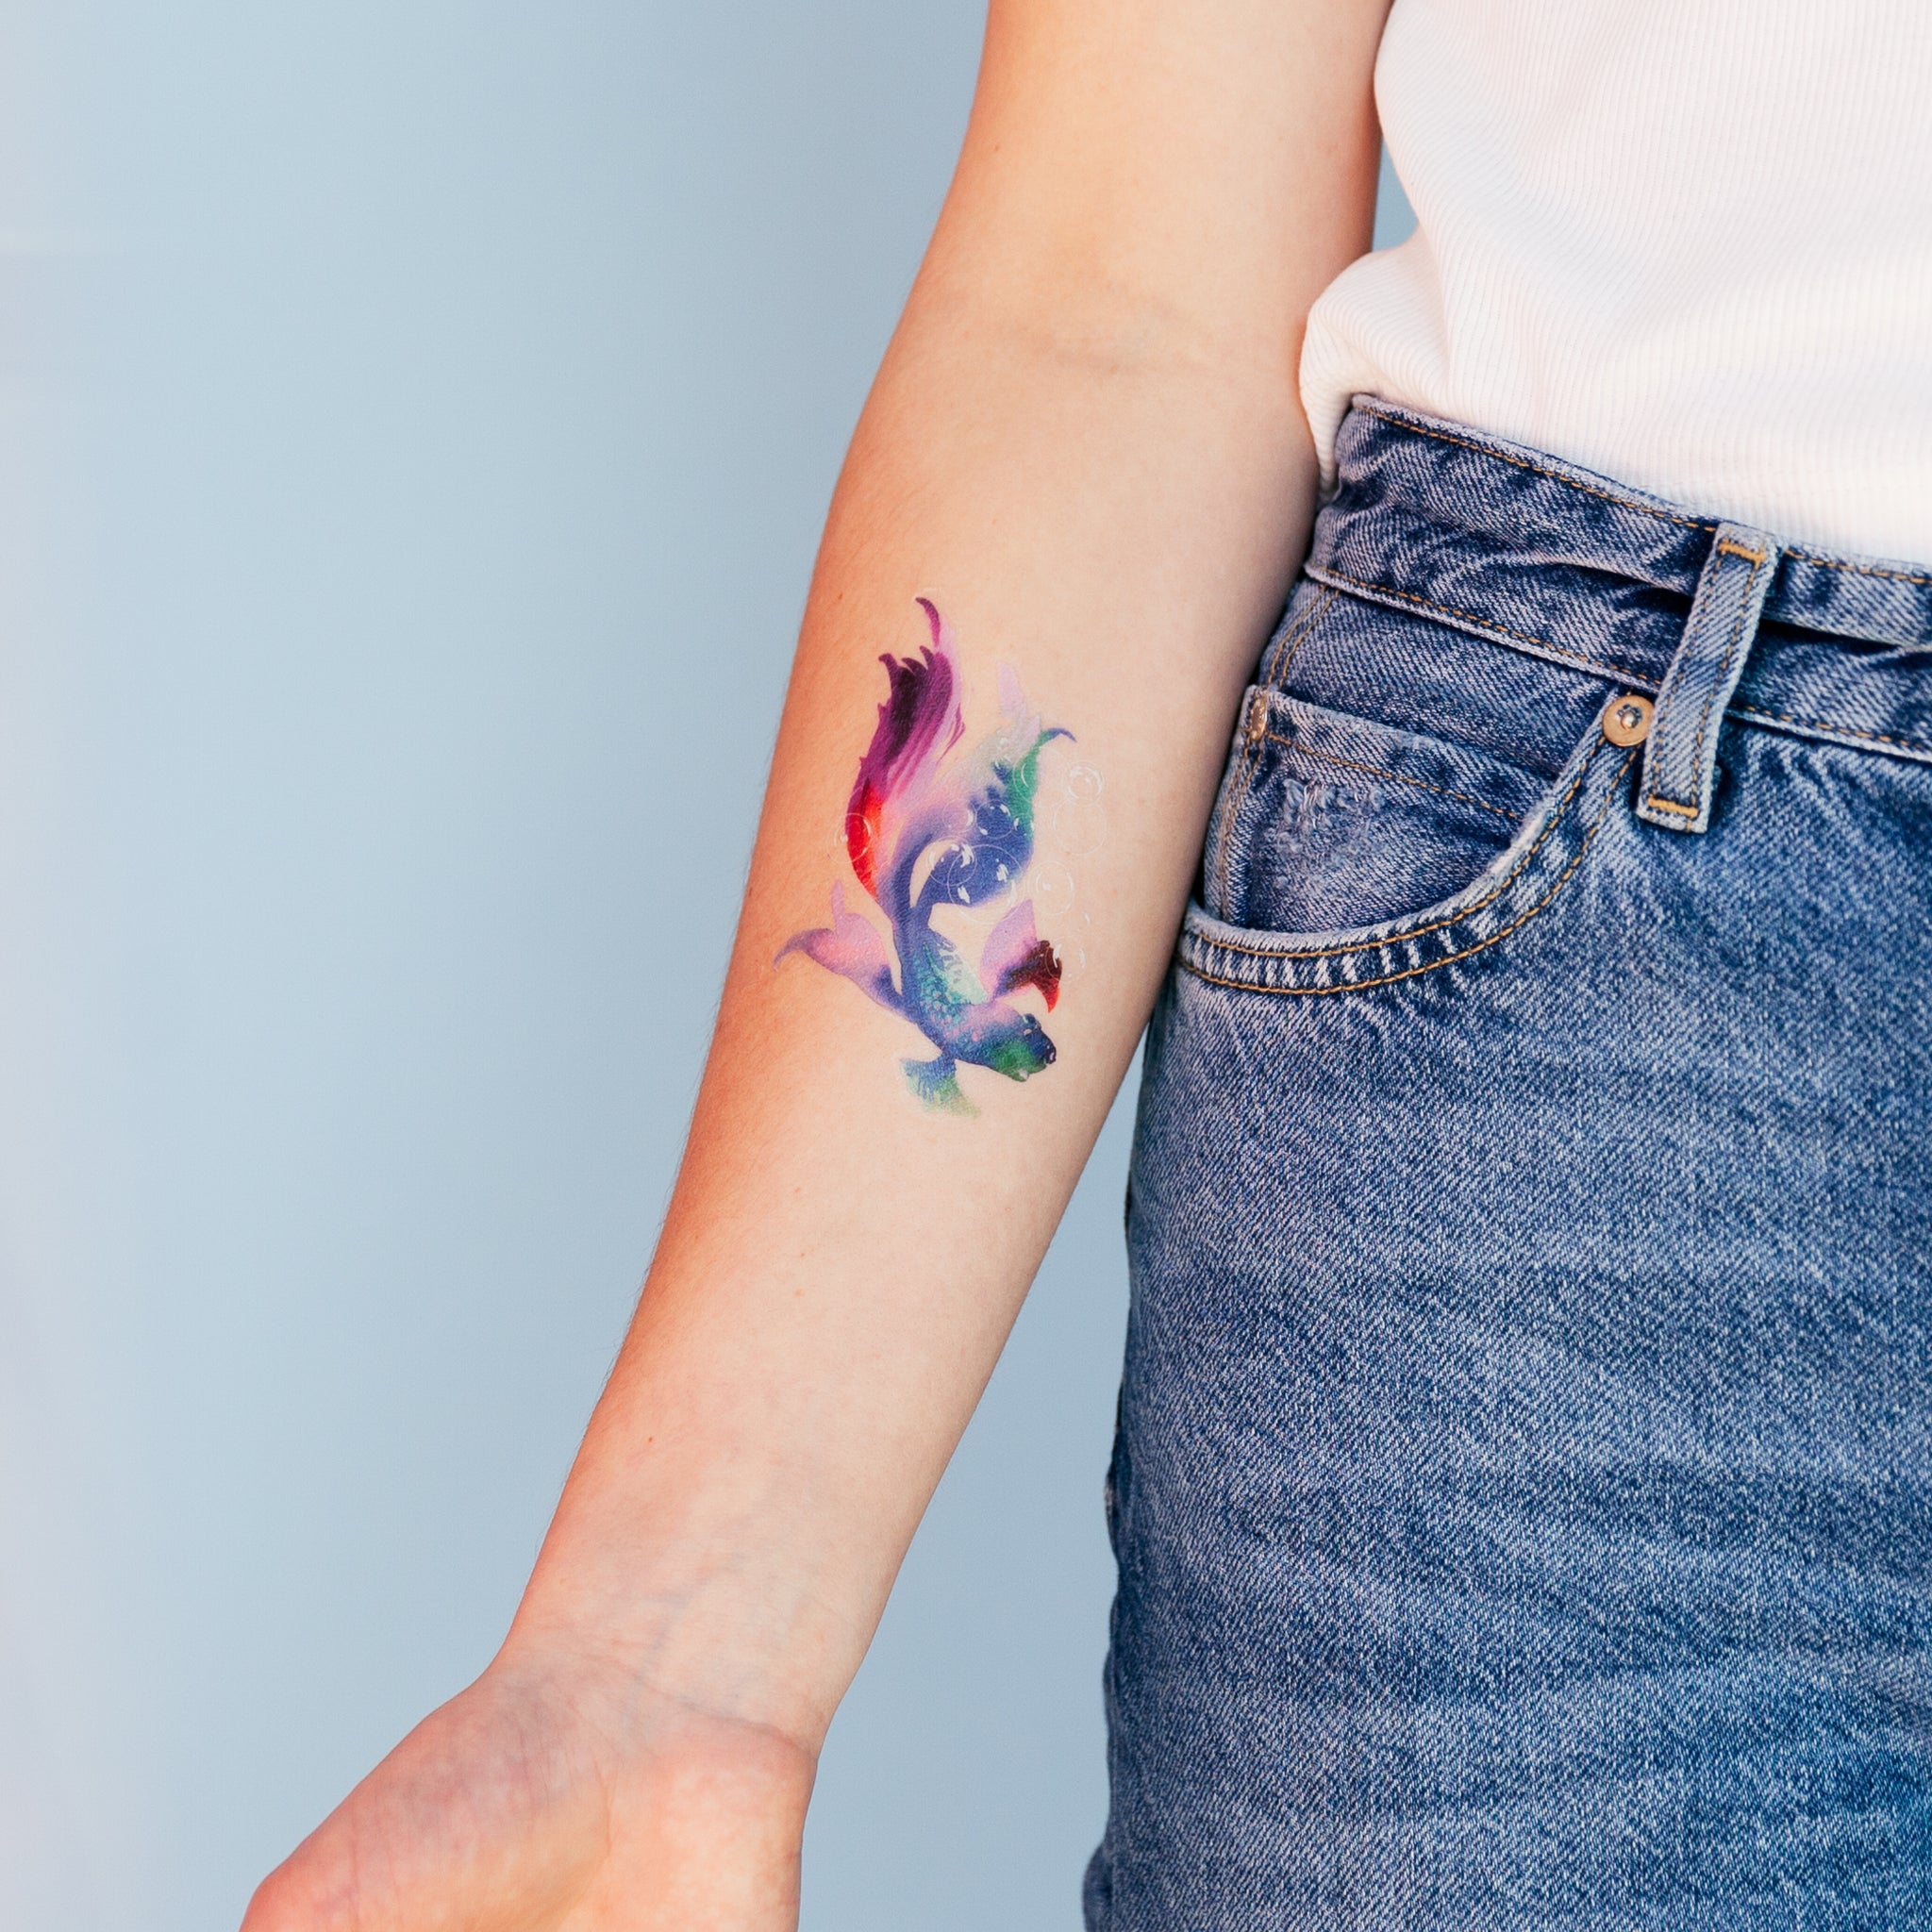 65 Mind-Blowing Koi Fish Tattoos And Their Meaning - AuthorityTattoo